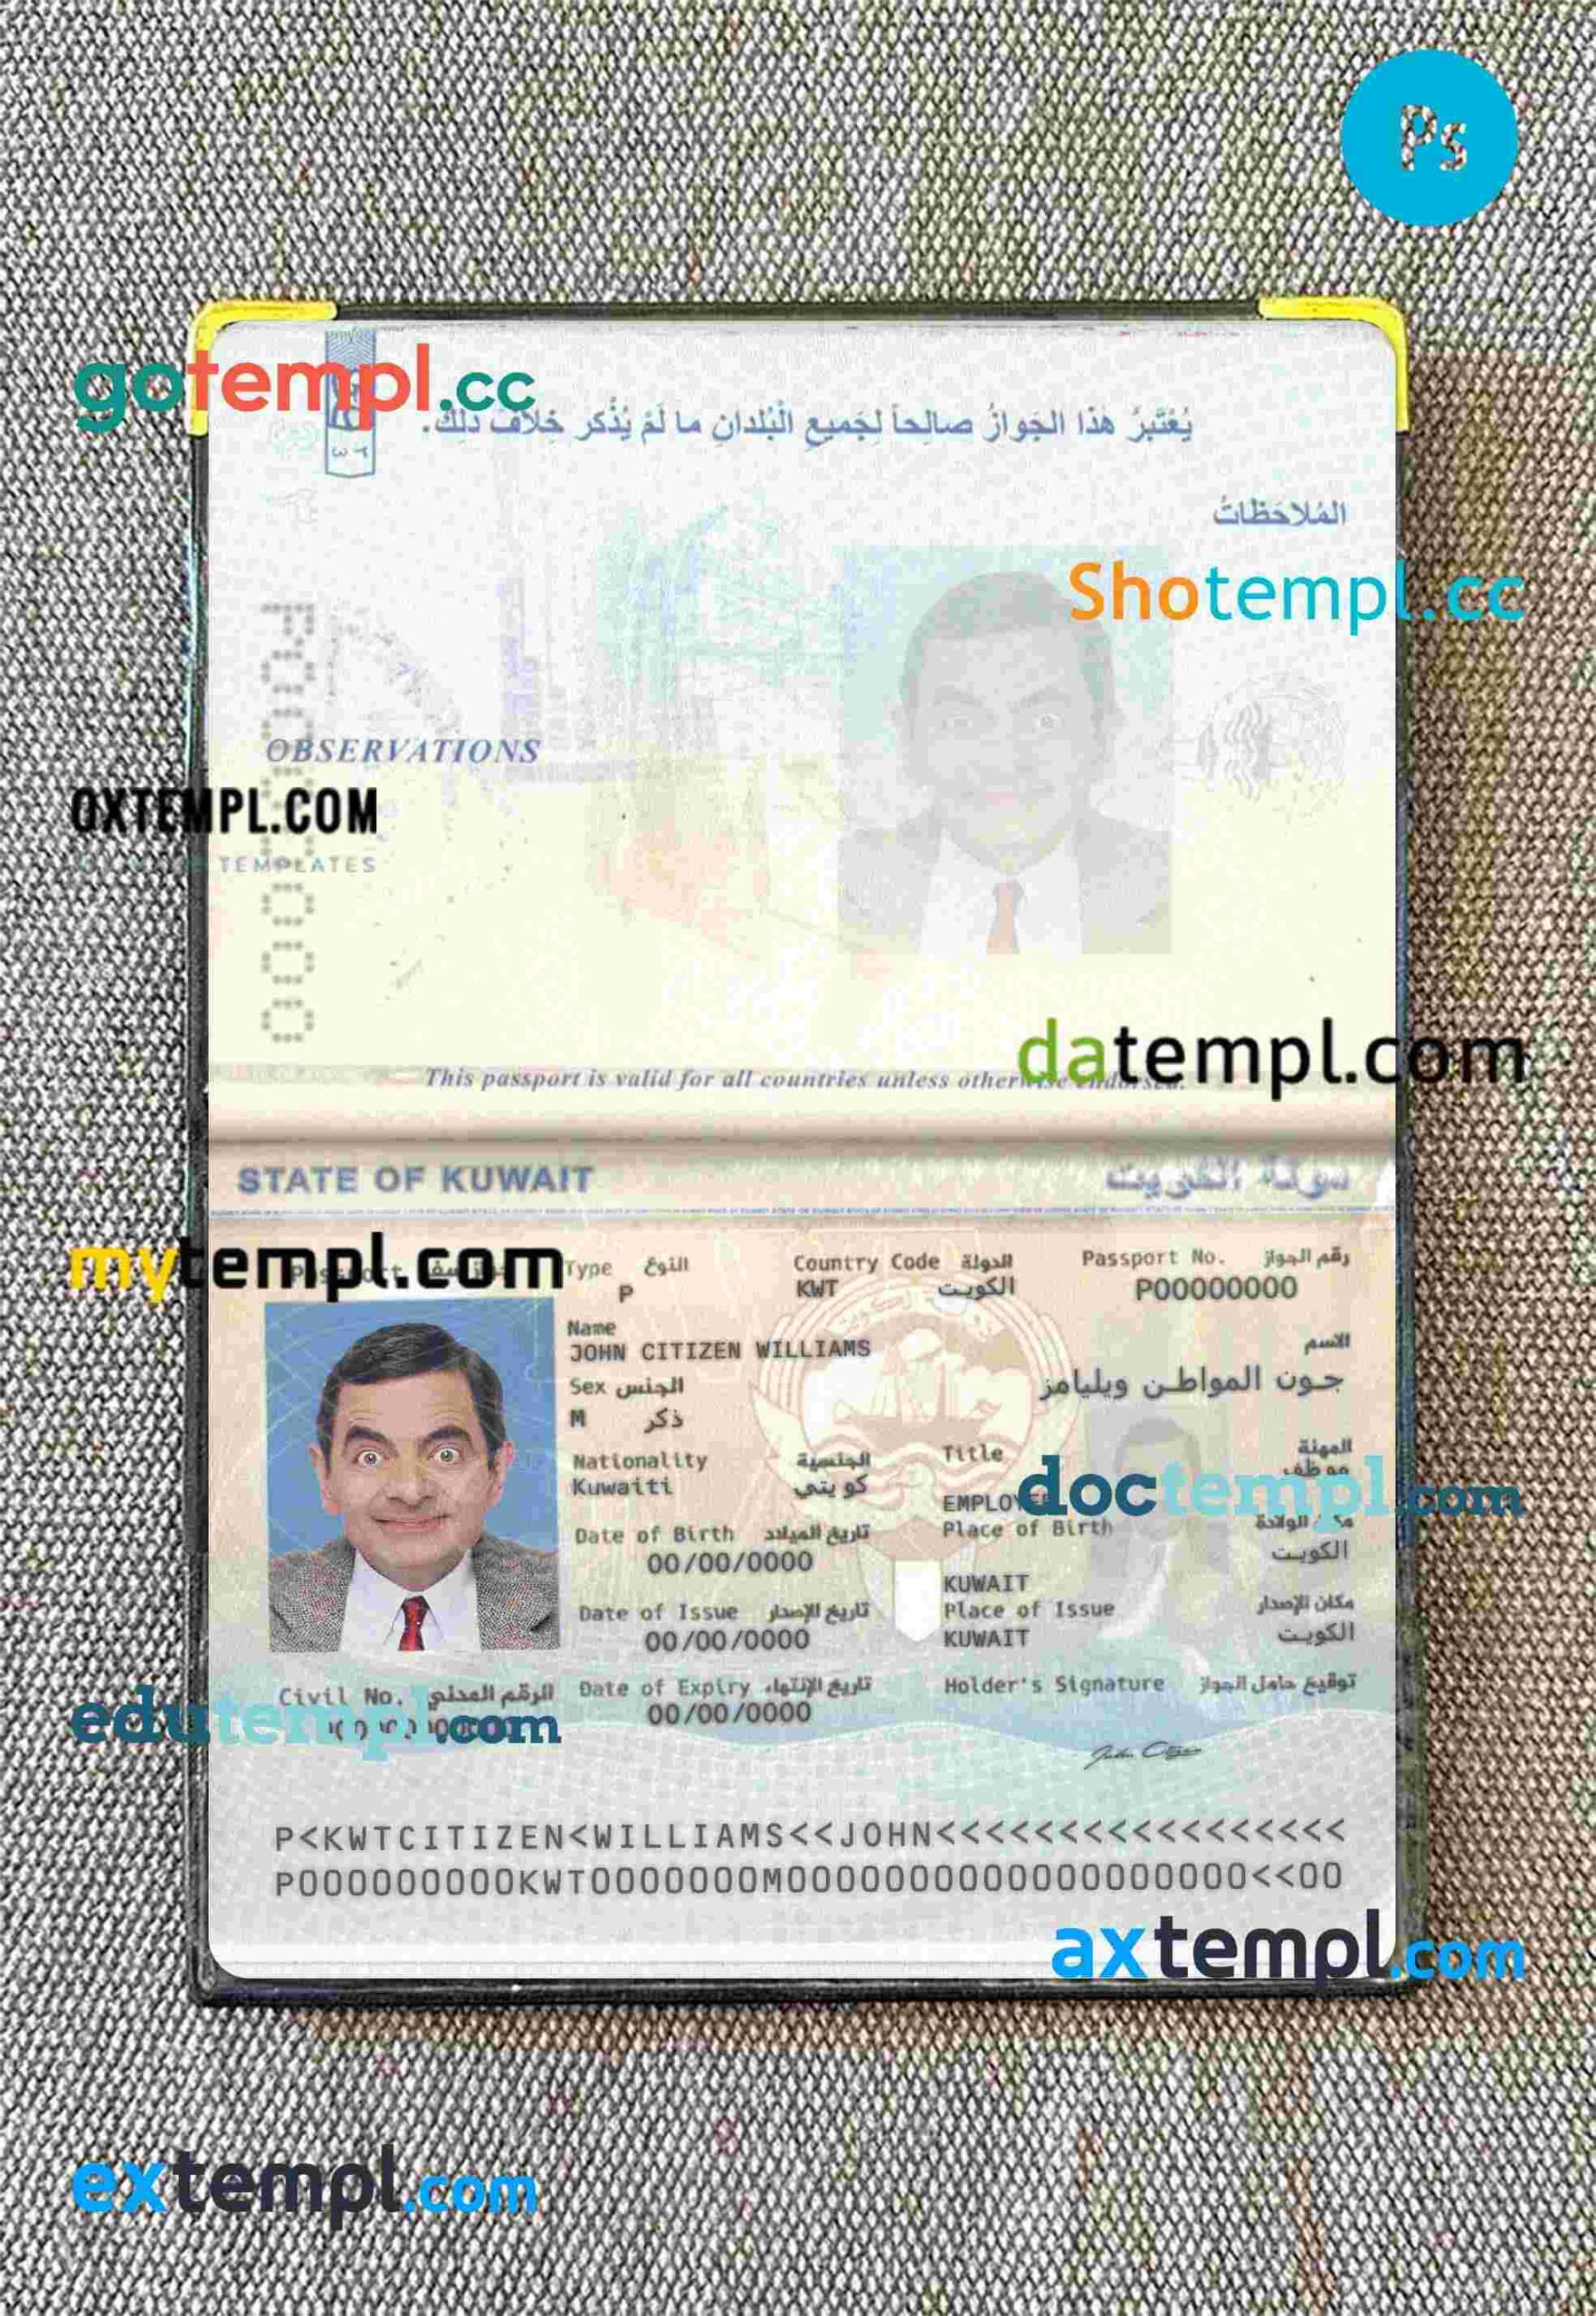 Austria ID card PSD files, scan and photo taken image, 2 in 1